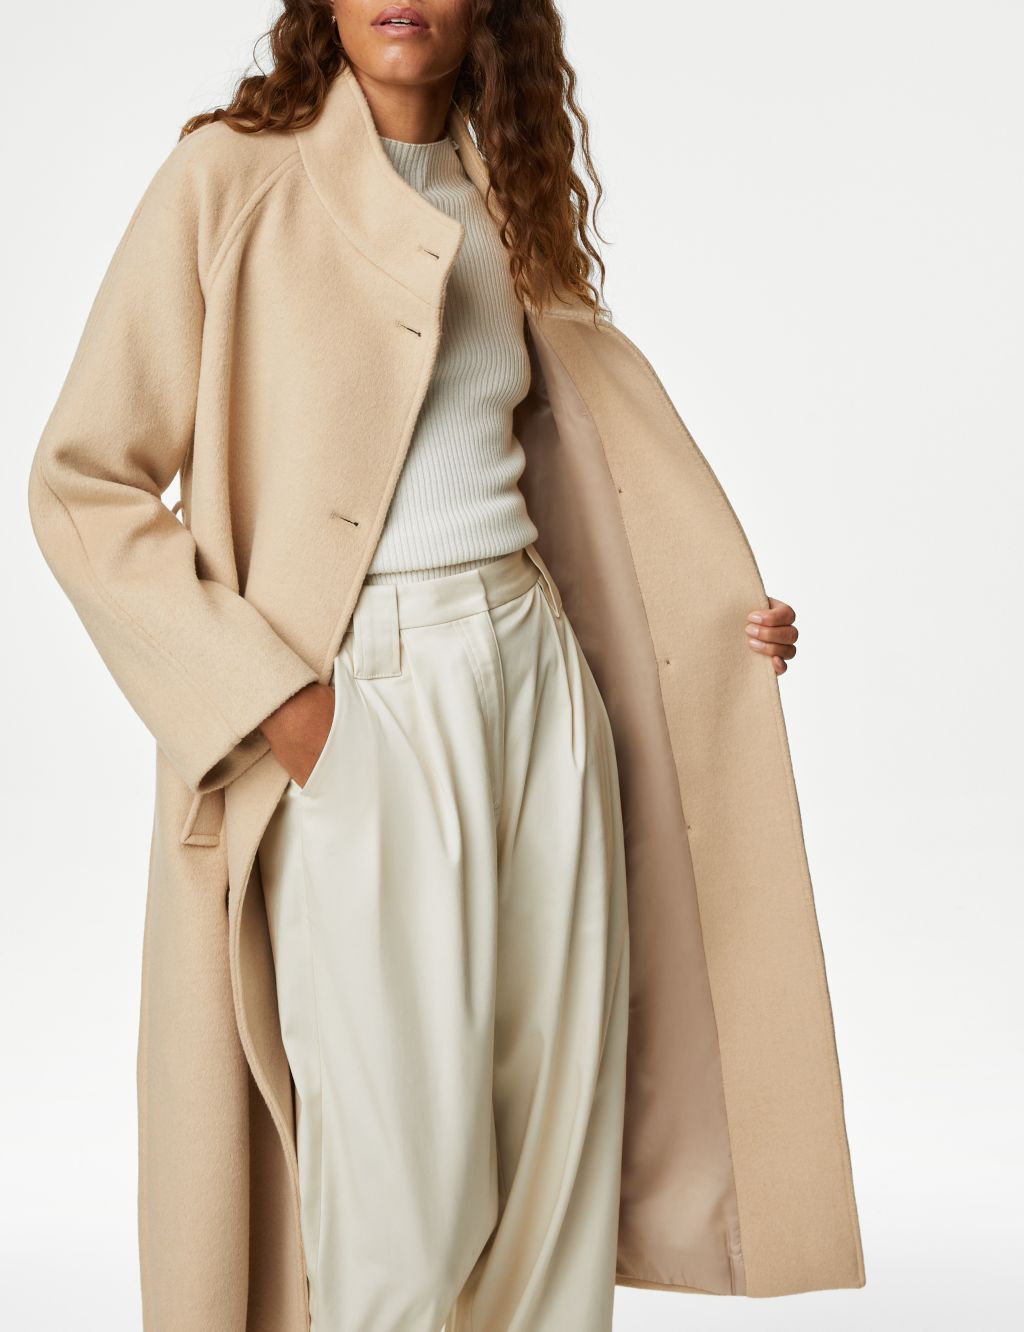 Belted Funnel Neck Wrap Coat with Wool image 4